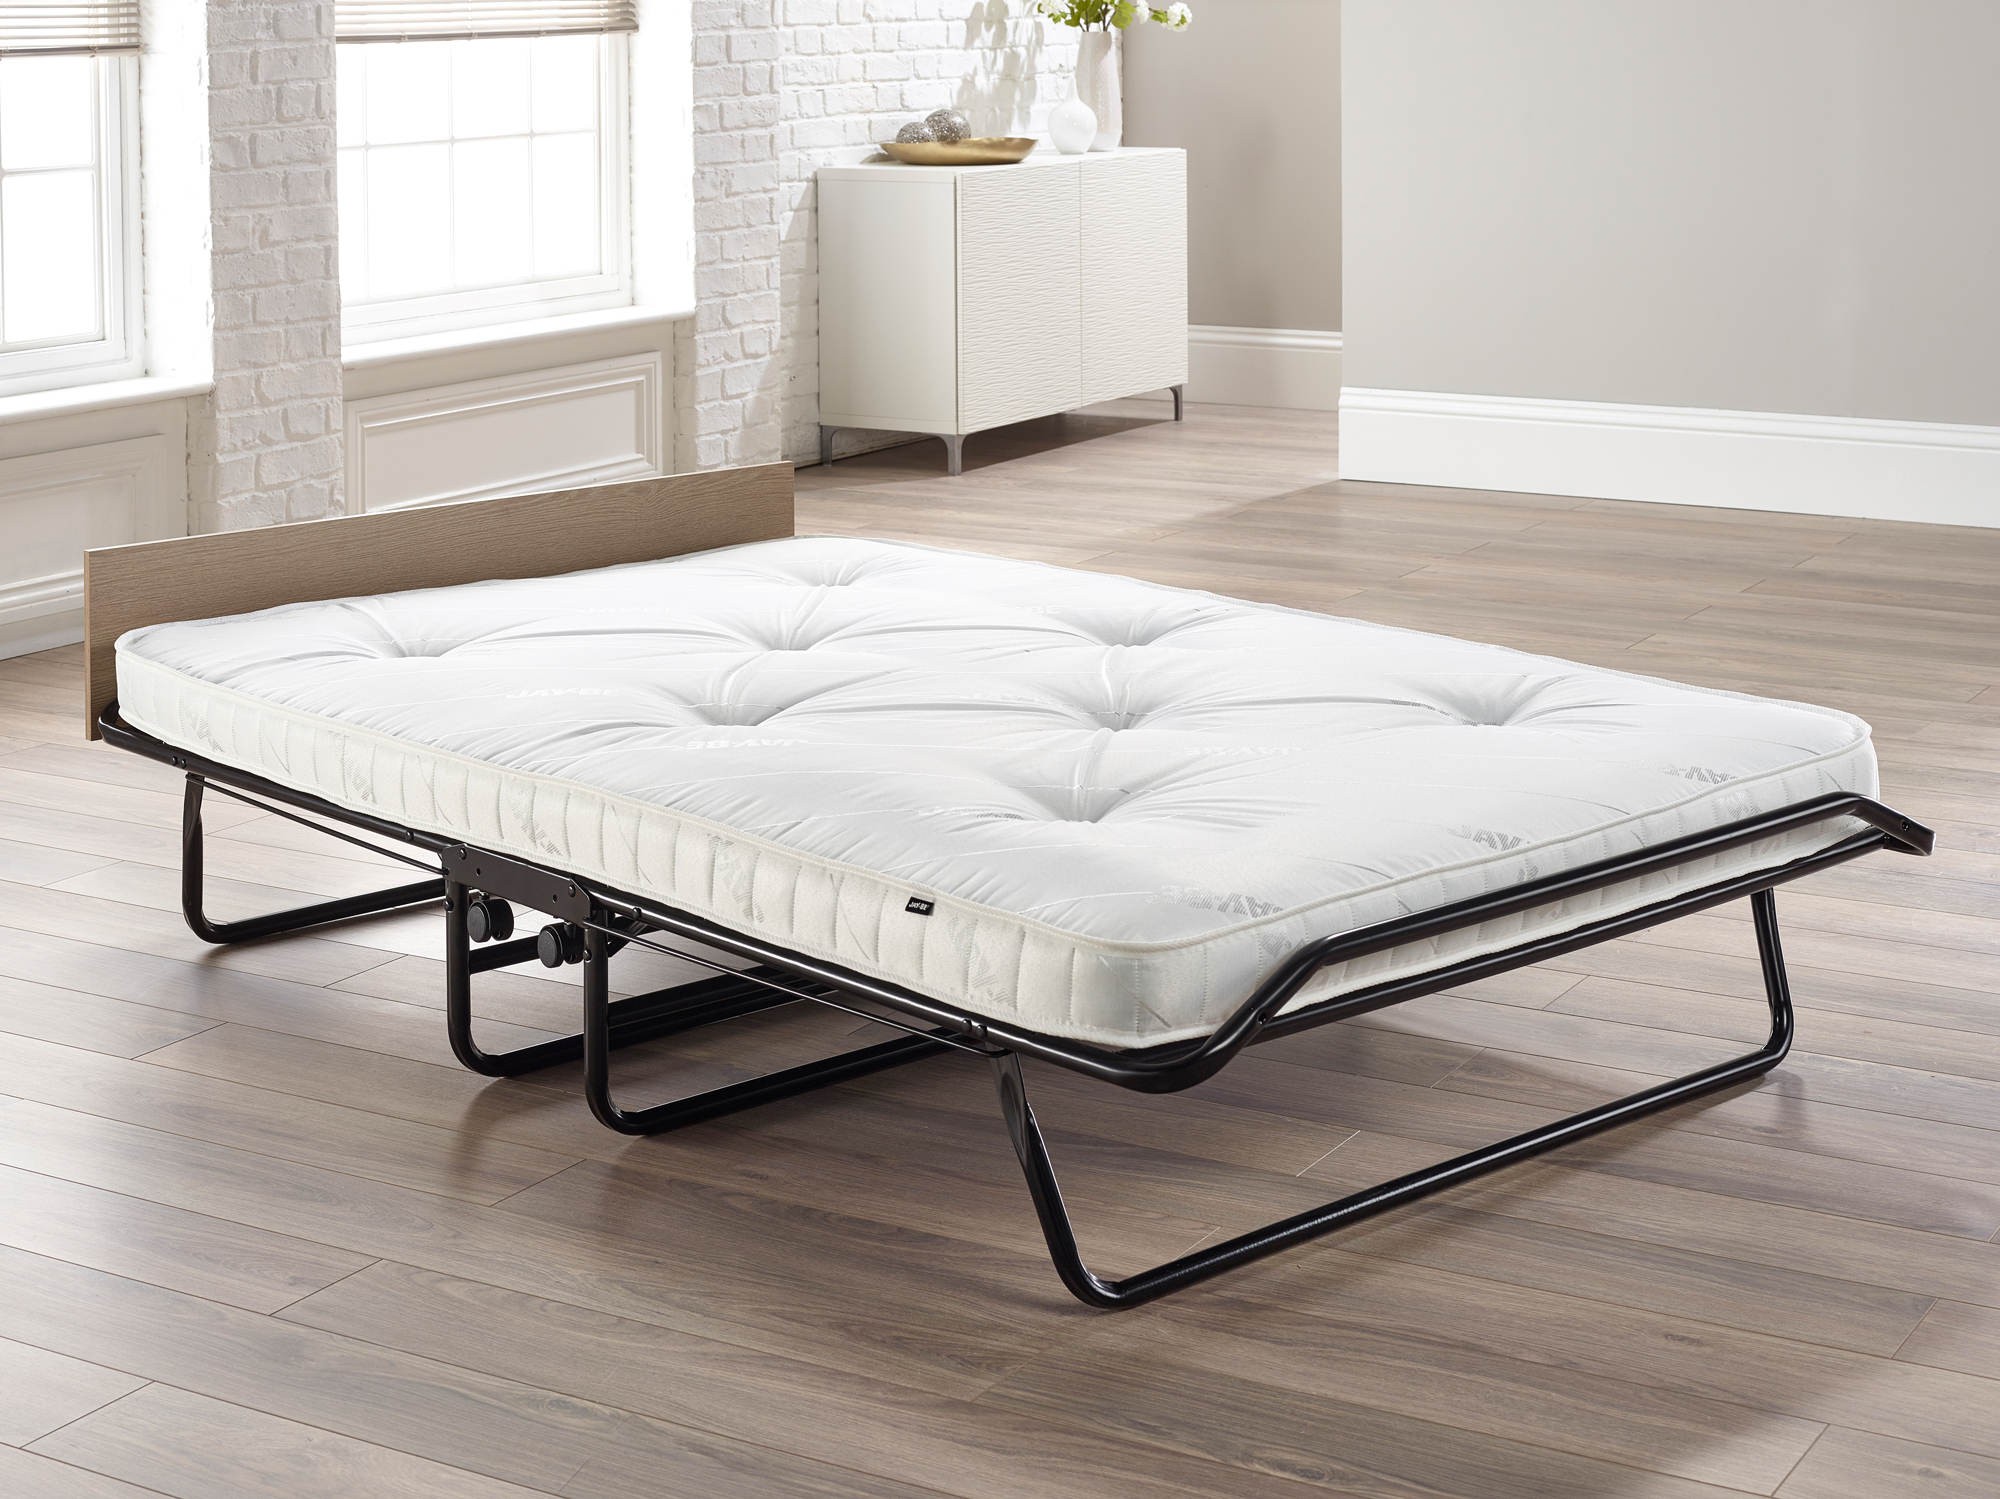 roll away beds with spring mattress